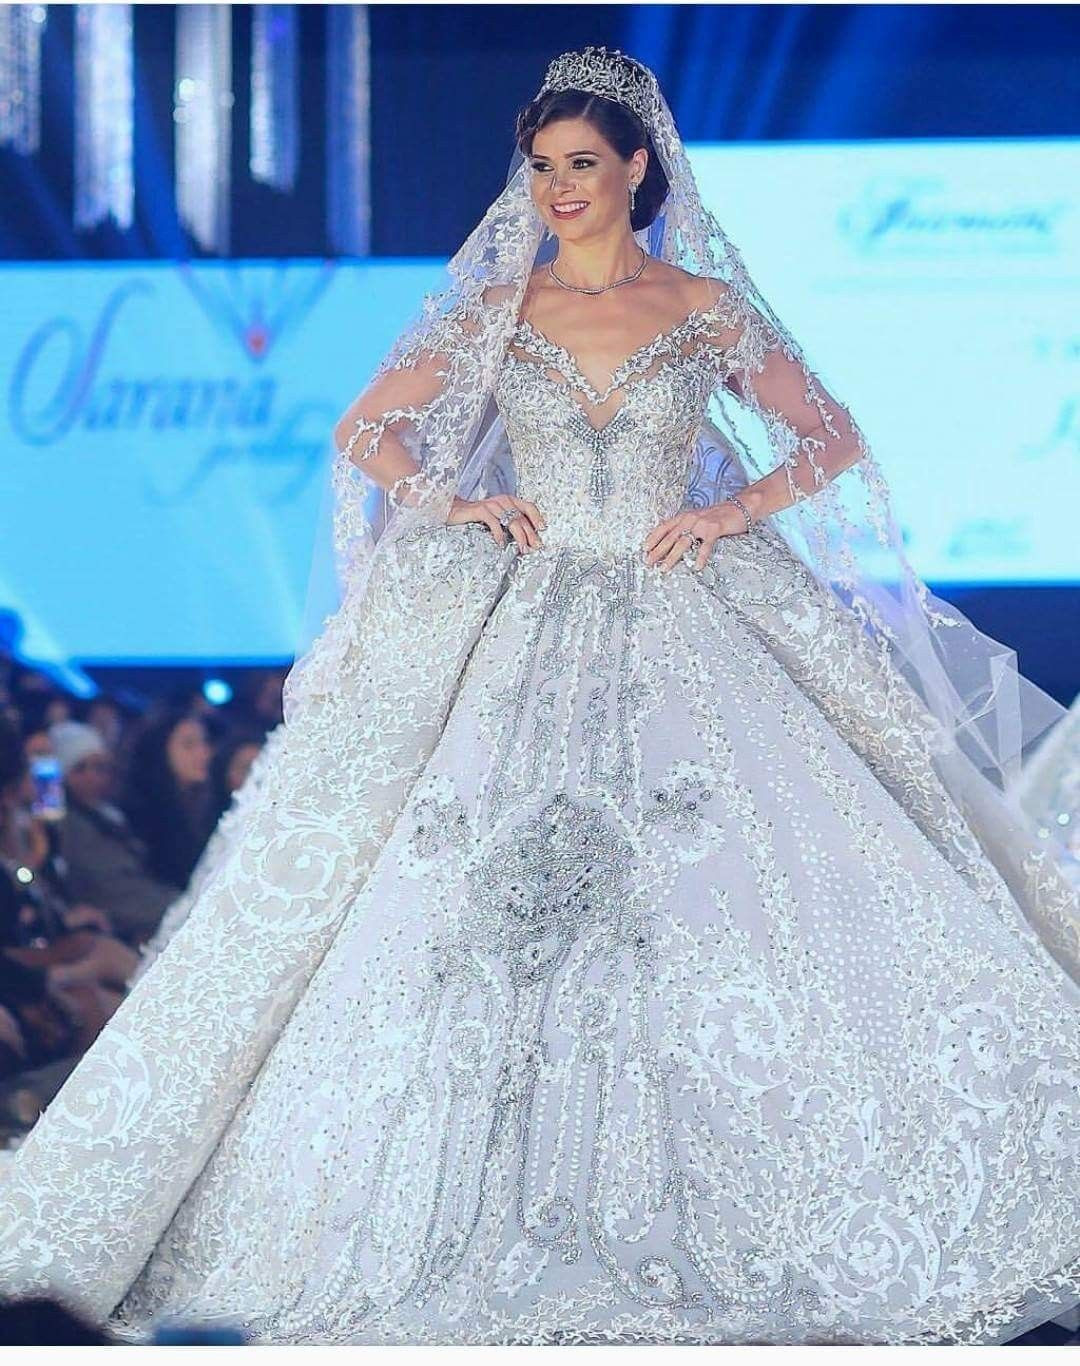 Most Expensive Wedding Dresses
 Expensive most wedding dresses in the world 2019 Top 10